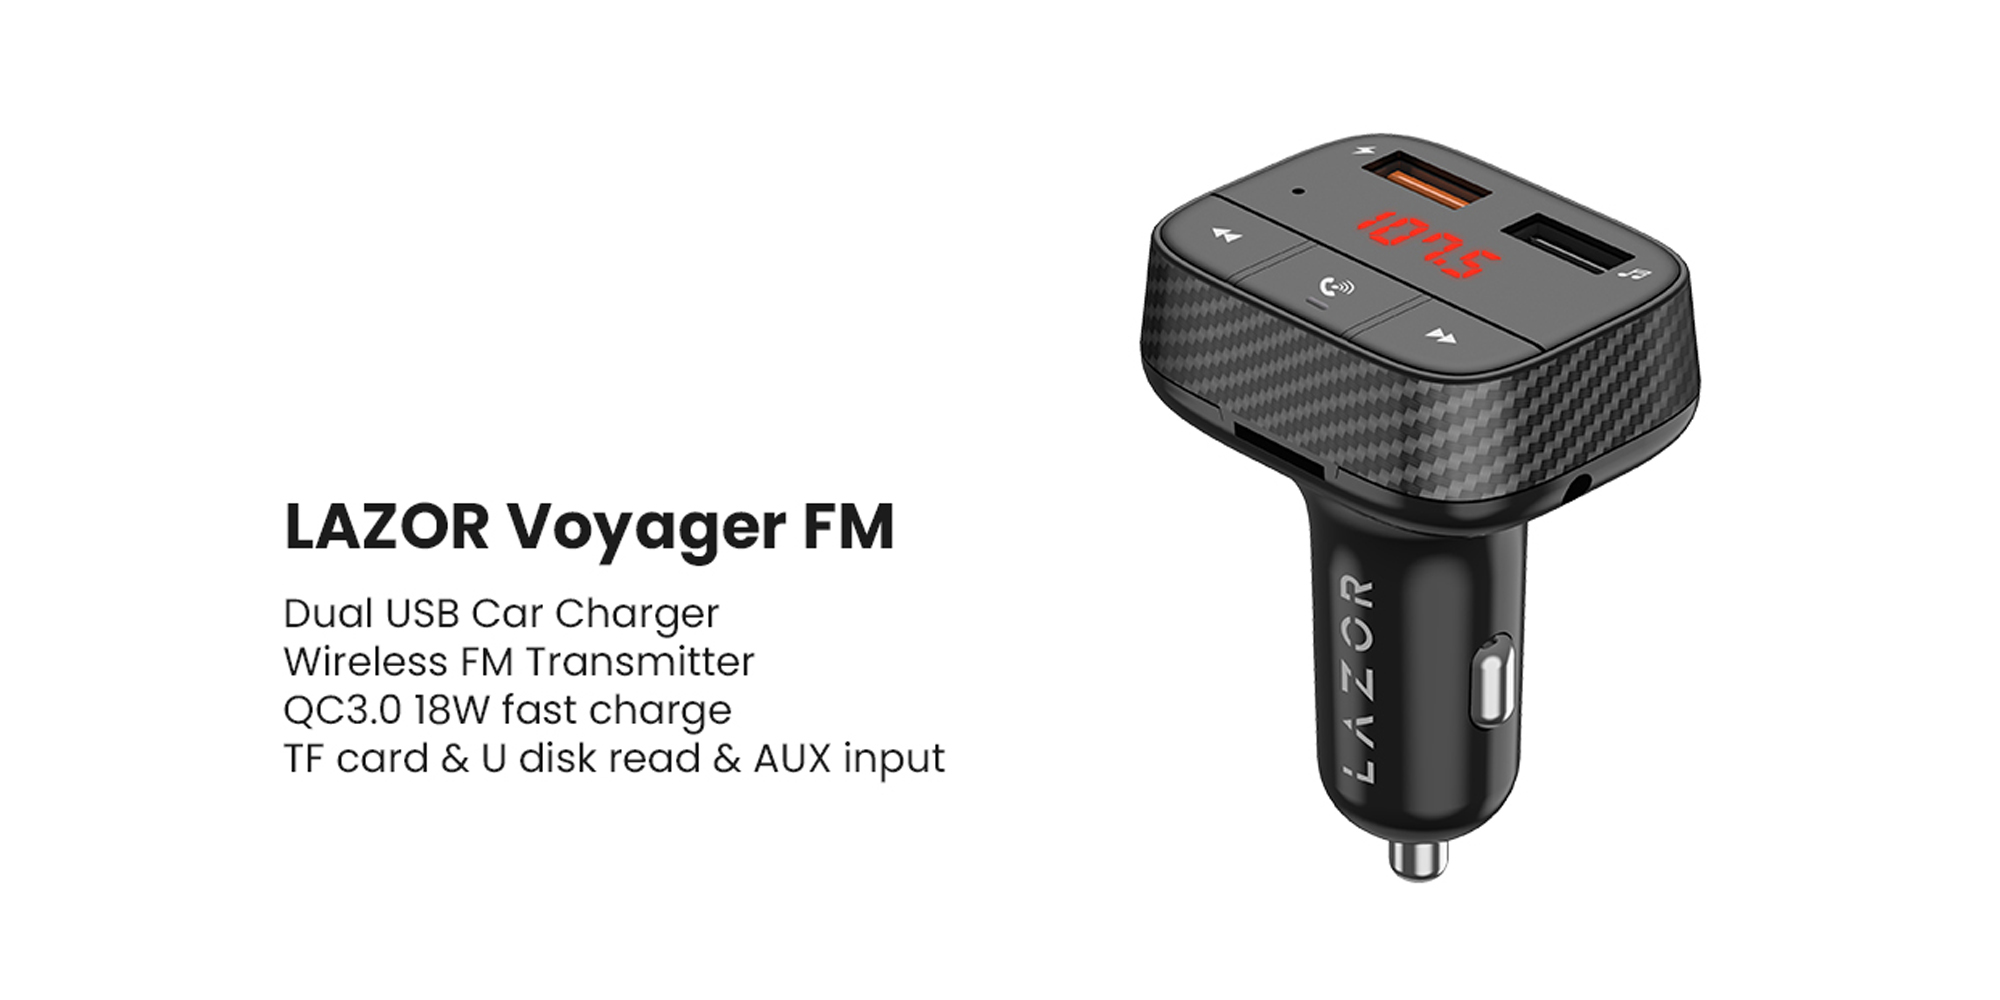 LAZOR Voyager CC31 FM: Dual USB Car Charger / Wireless FM Transmitter, 20W Fast Charging Output, AUX Audio Input, Function Remote Control, FM Frequency: Customizable (87.5-108.0MHz), Black